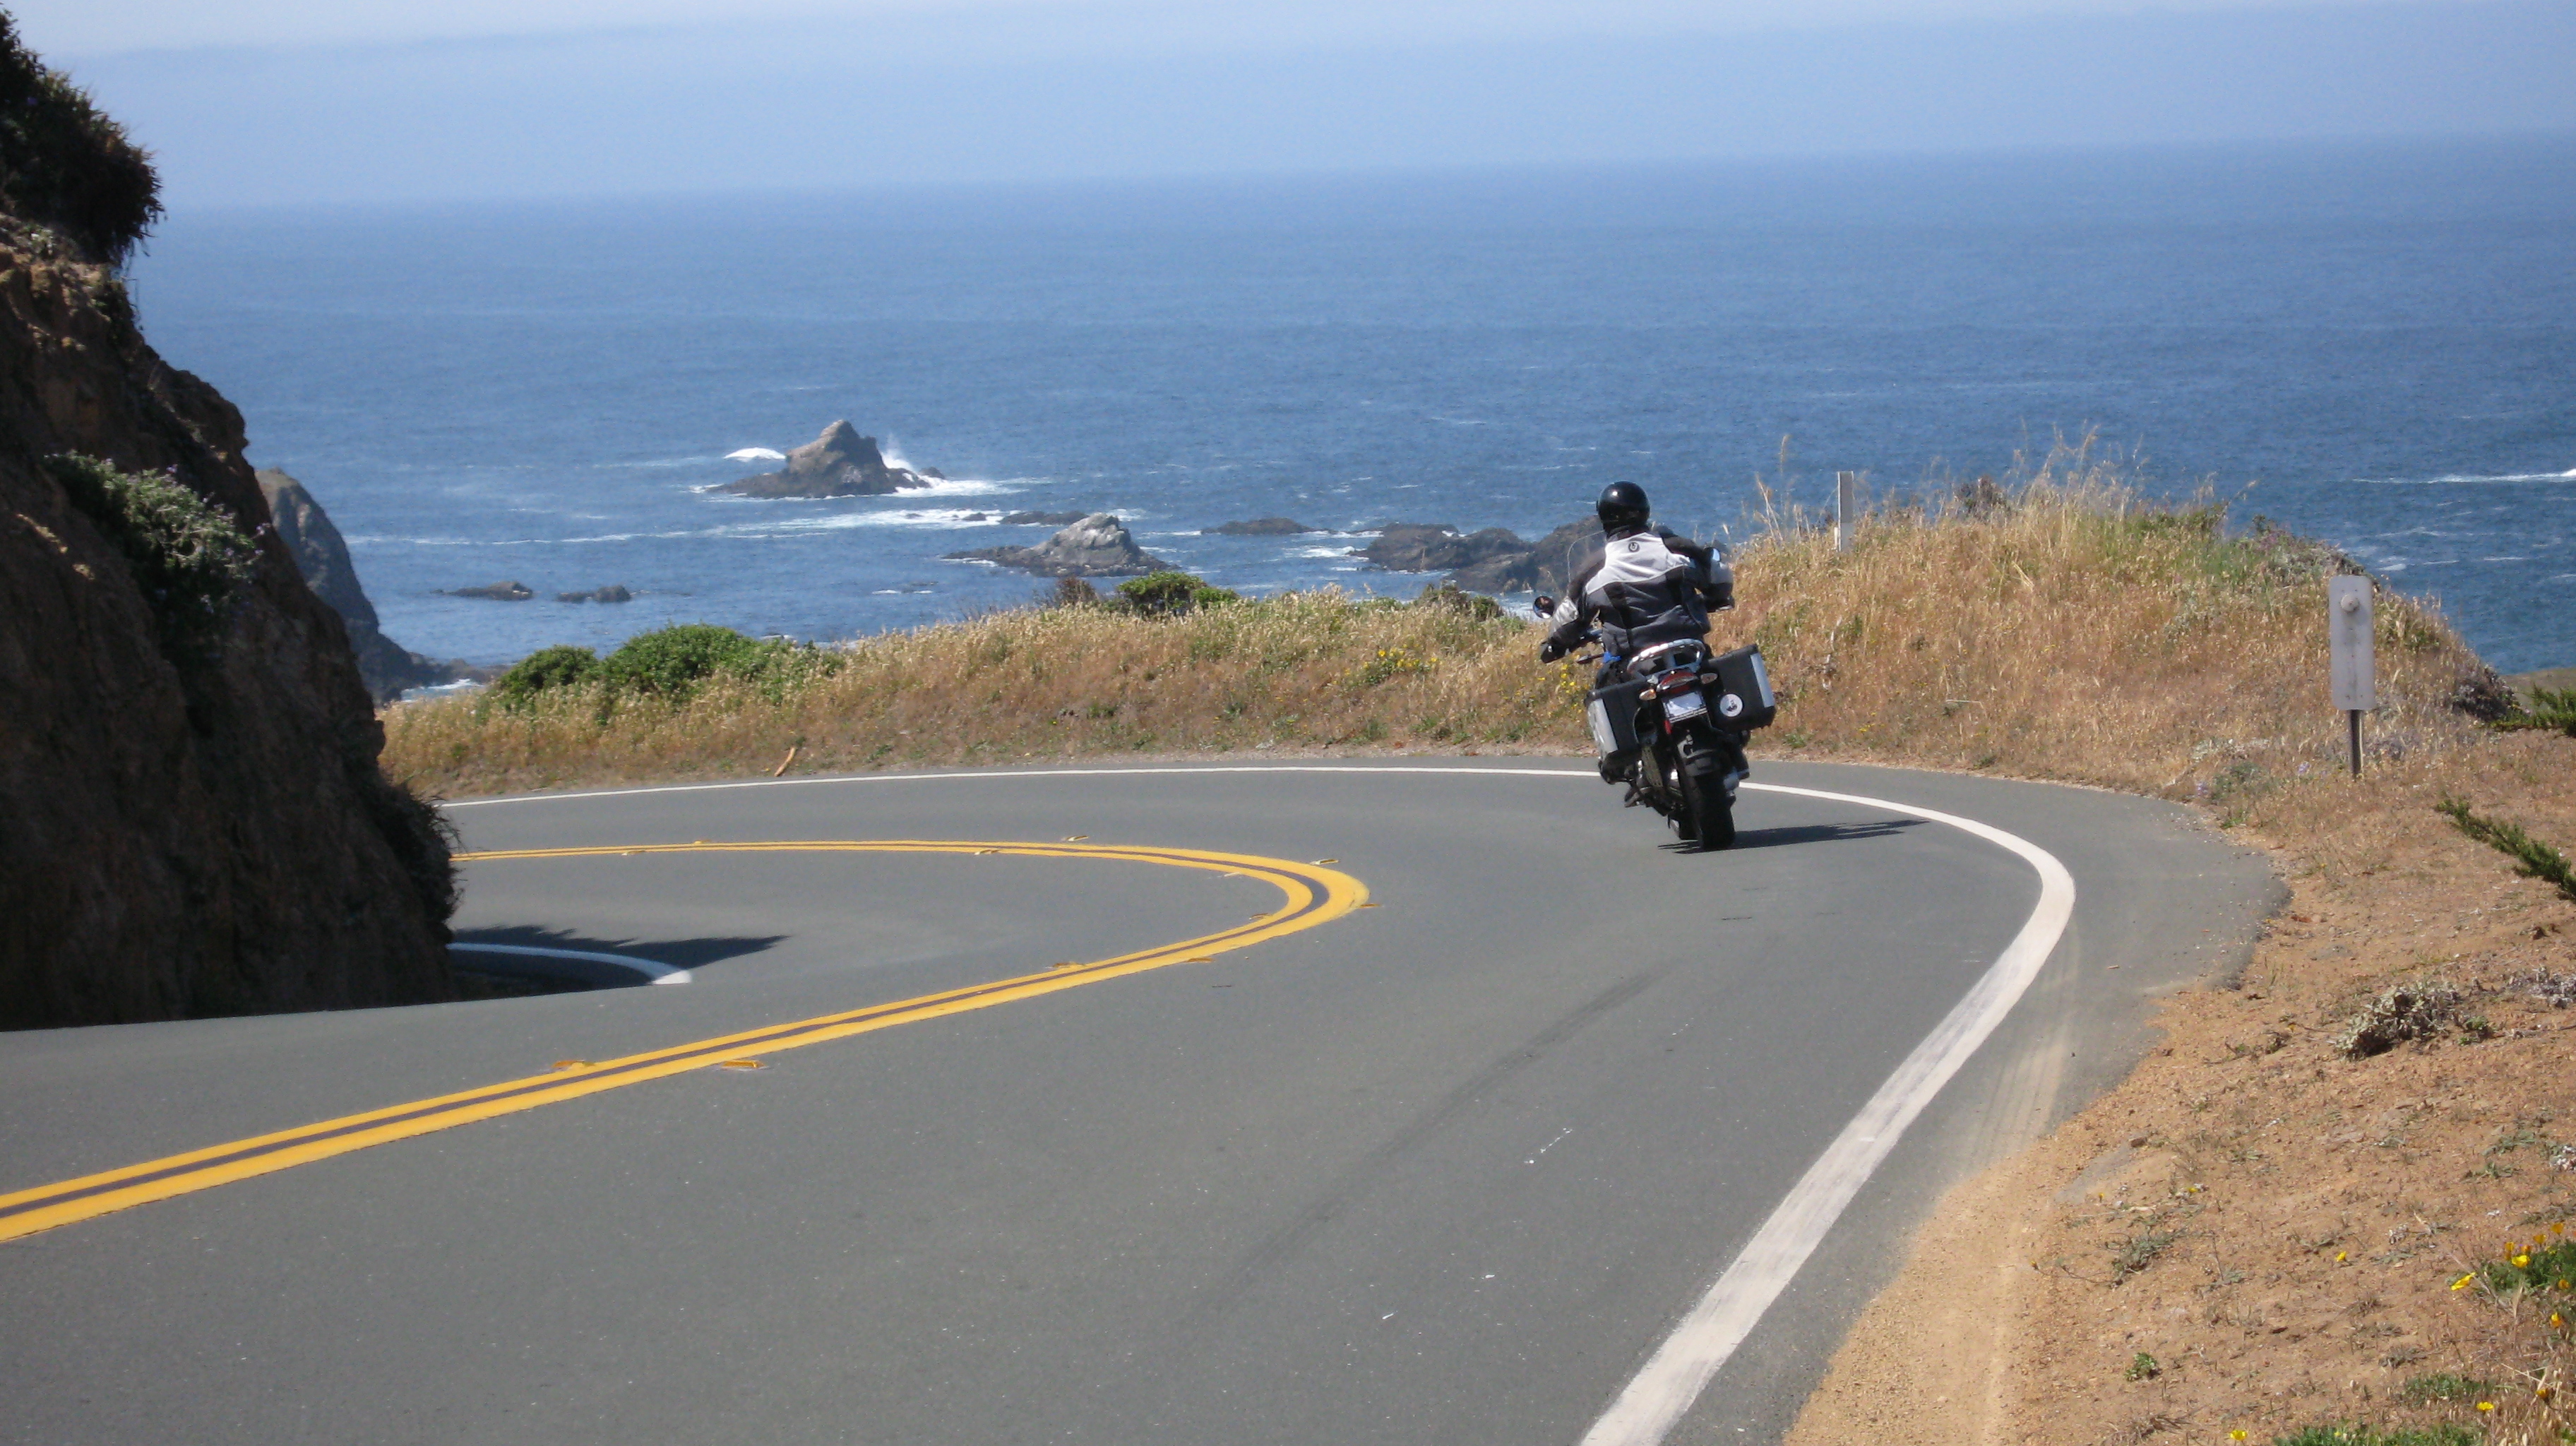 Motorcycle Rentals - Motorcycle Place in California, USA | Motorcycle